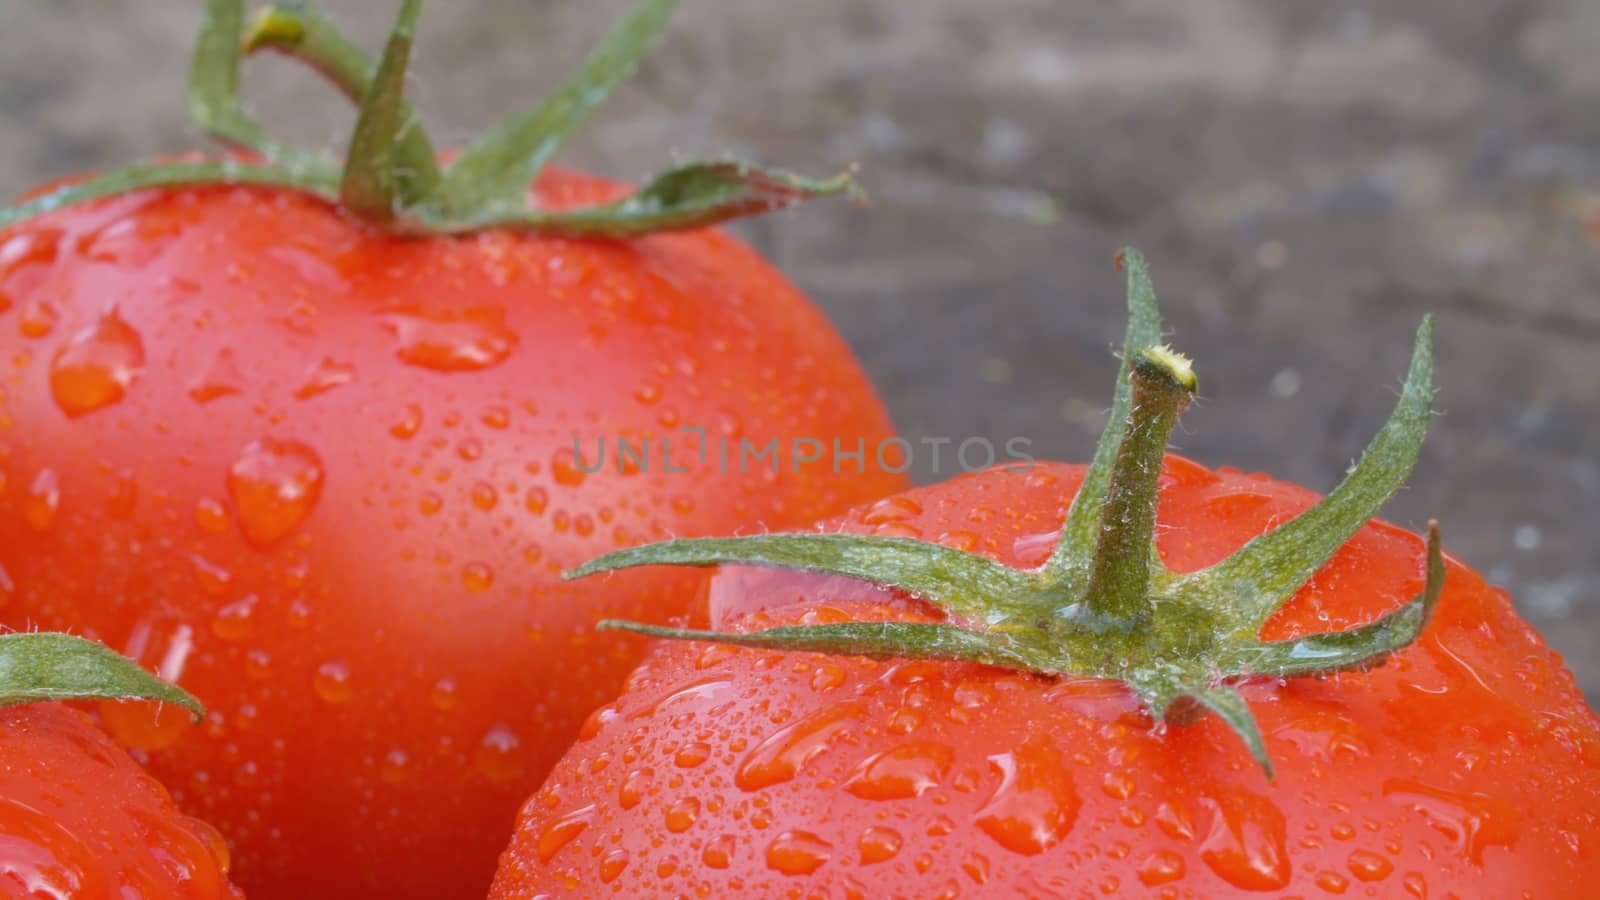 Tomatoes in drops of water by Alize